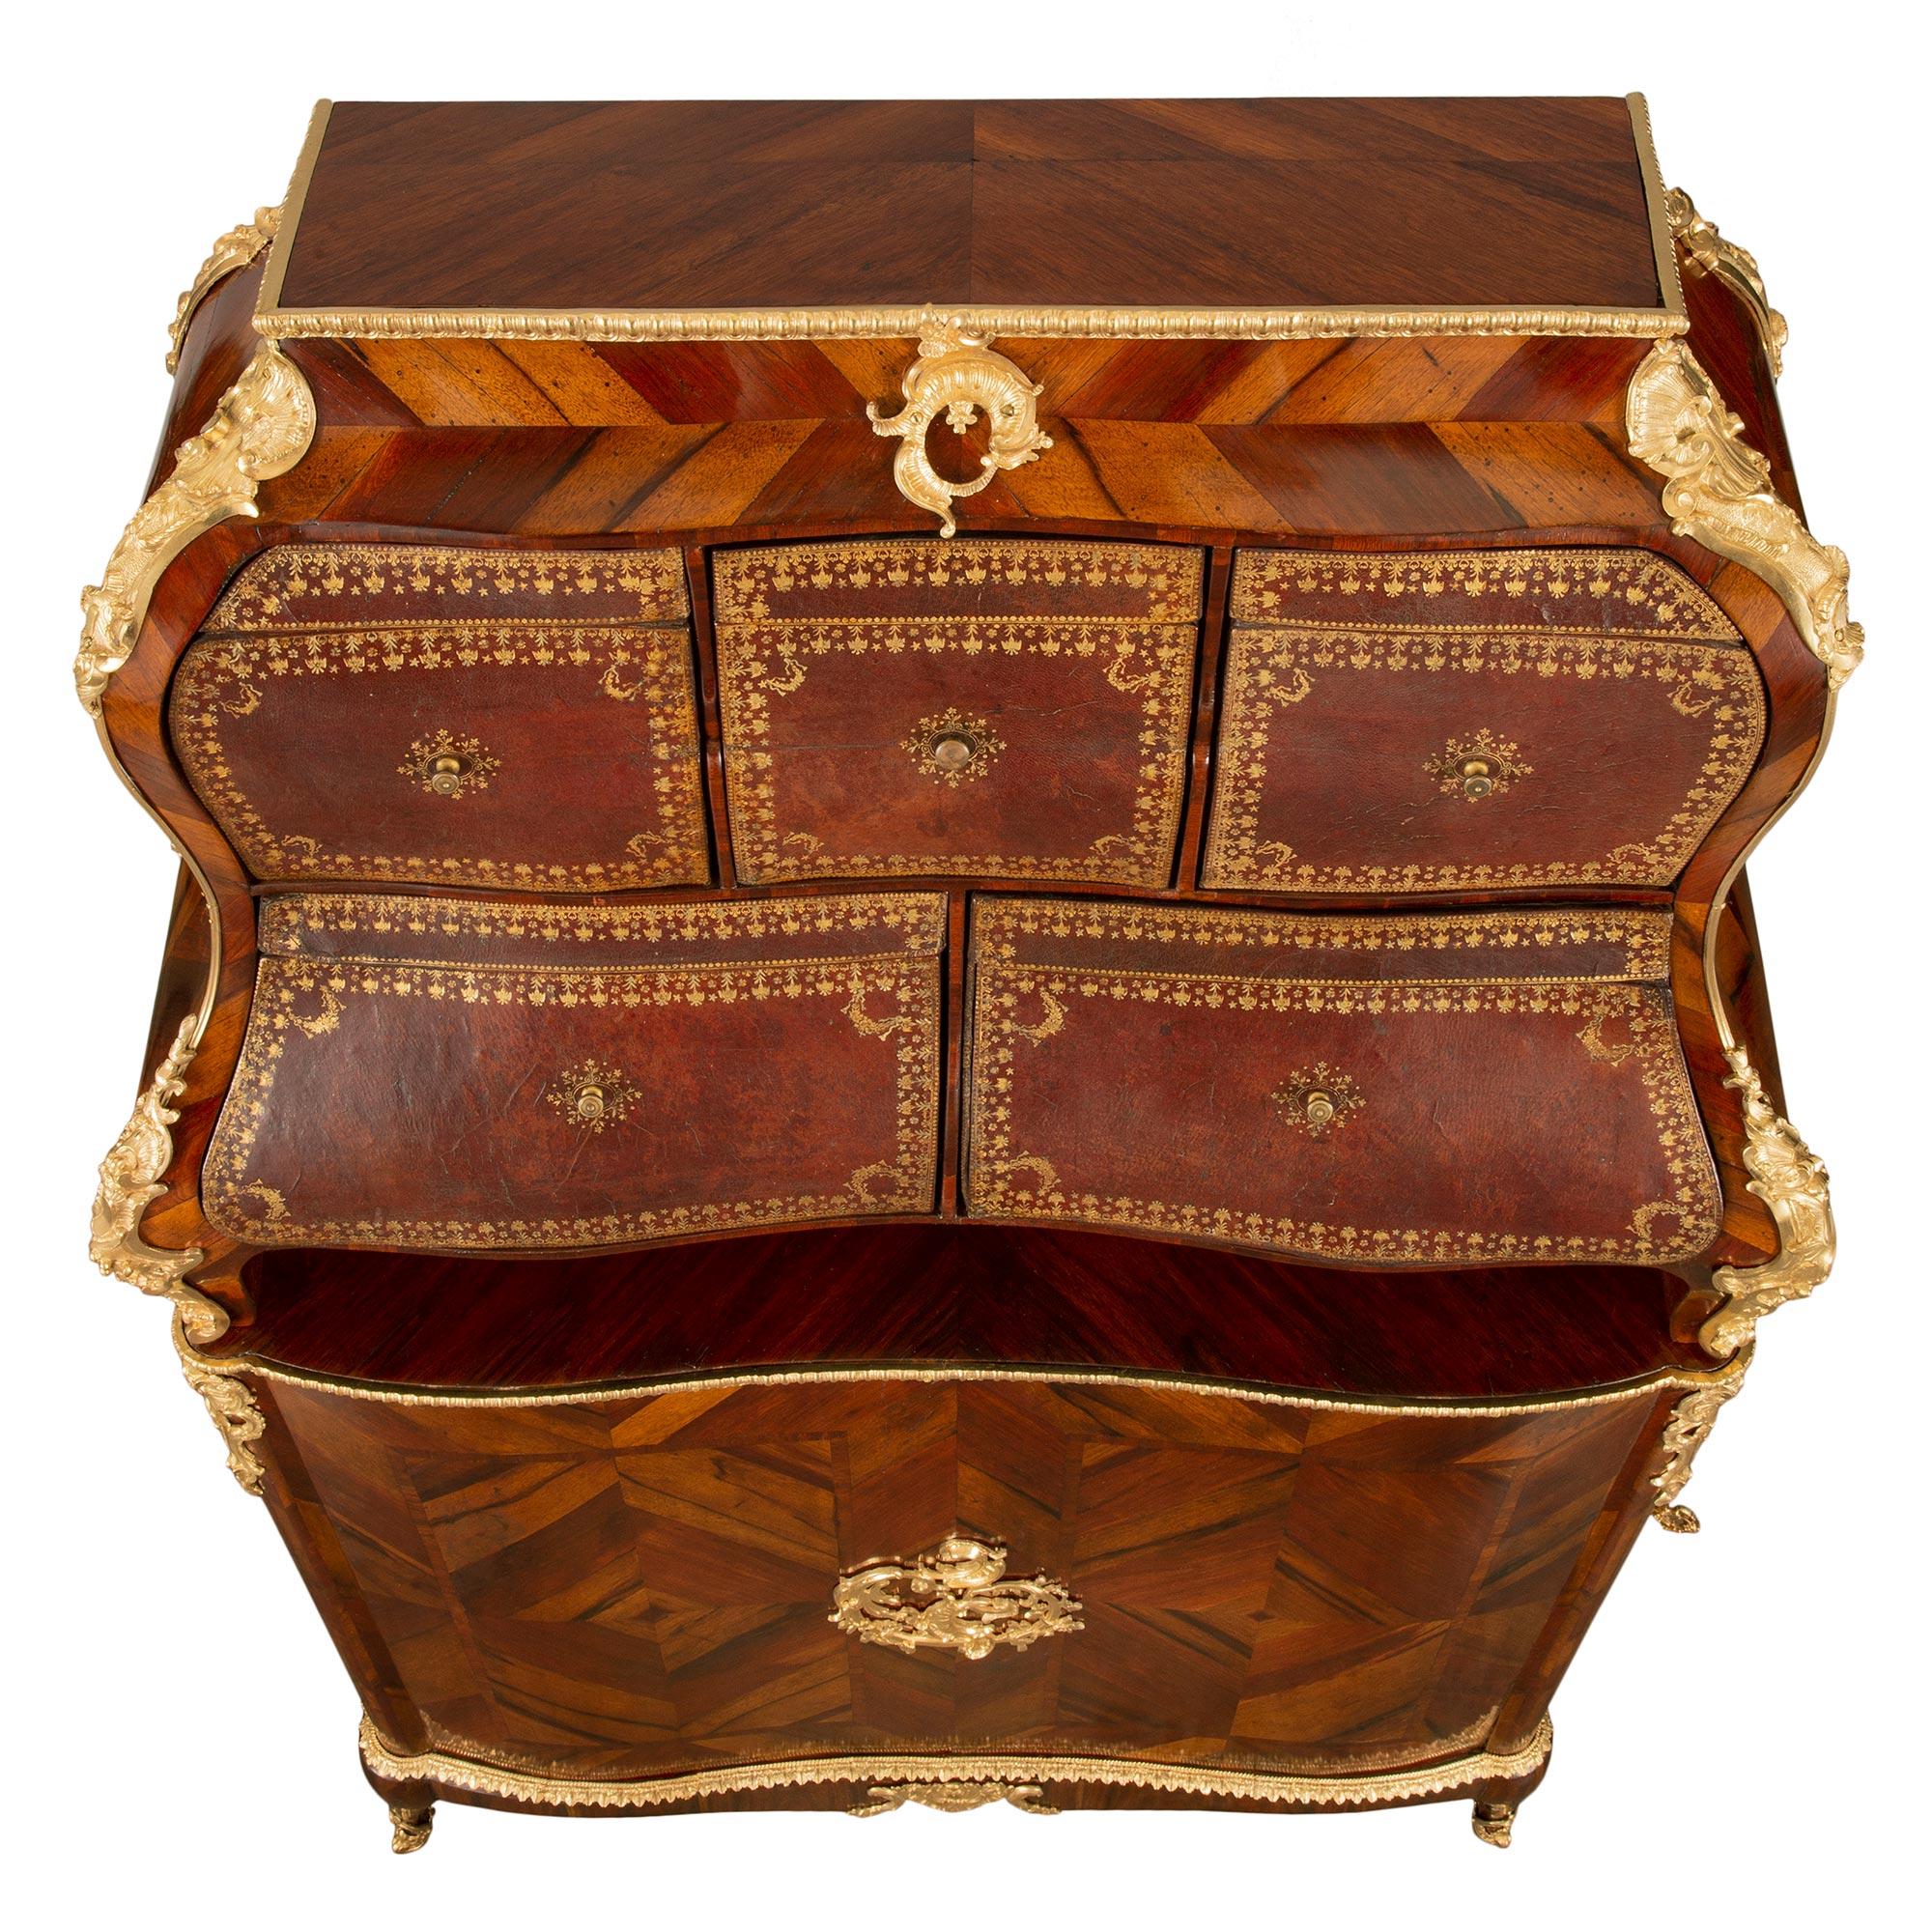 A sensational French 18th century Louis XV Period kingwood, ormolu and leather Cartonnier, signed Jacques DuBois. This most decorative and extremely elegant Cartonnier is raised by handsome lightly curved legs with fine pierced foliate sabots. The